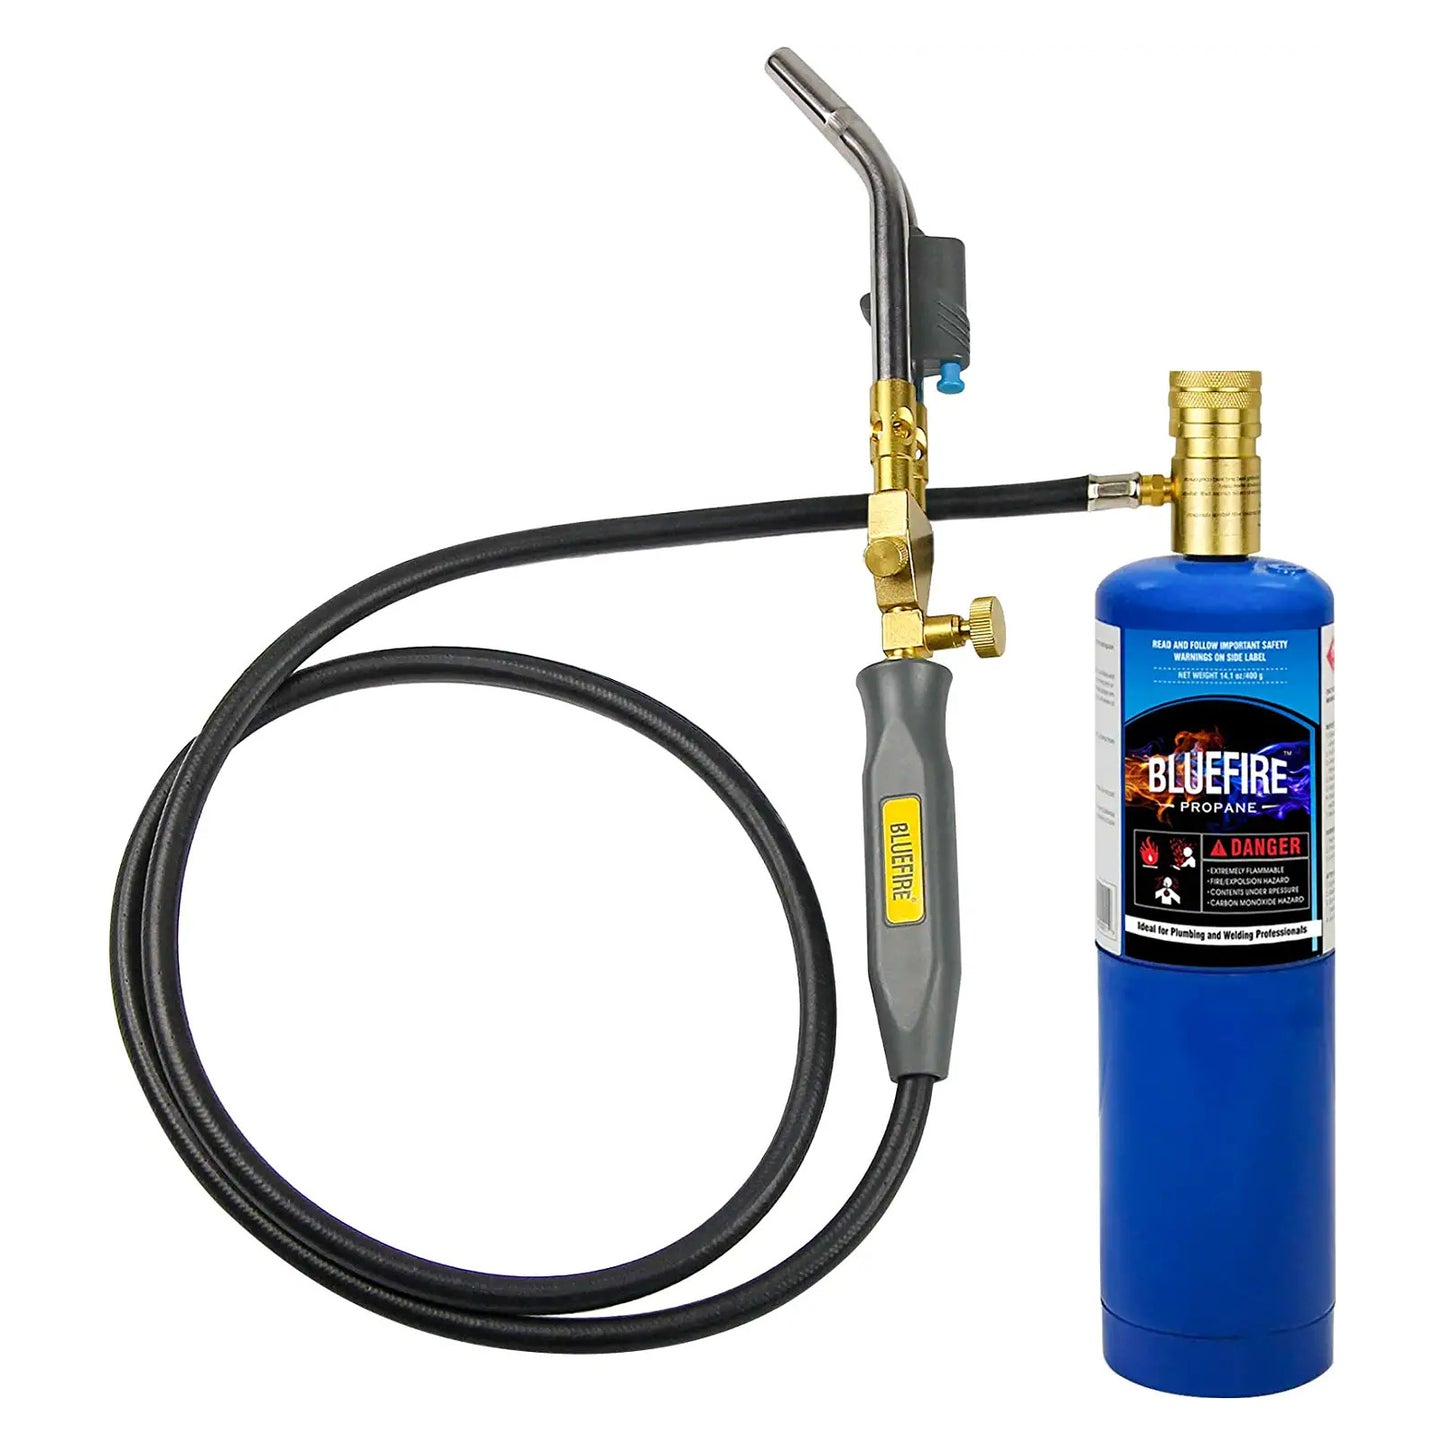 HZ-8150 Double Heads Swirl Flame Self-Ignition Hosed Turbo Torch 5' long Hose Trigger Start MAPP MAP Propane Welding Blowtorch